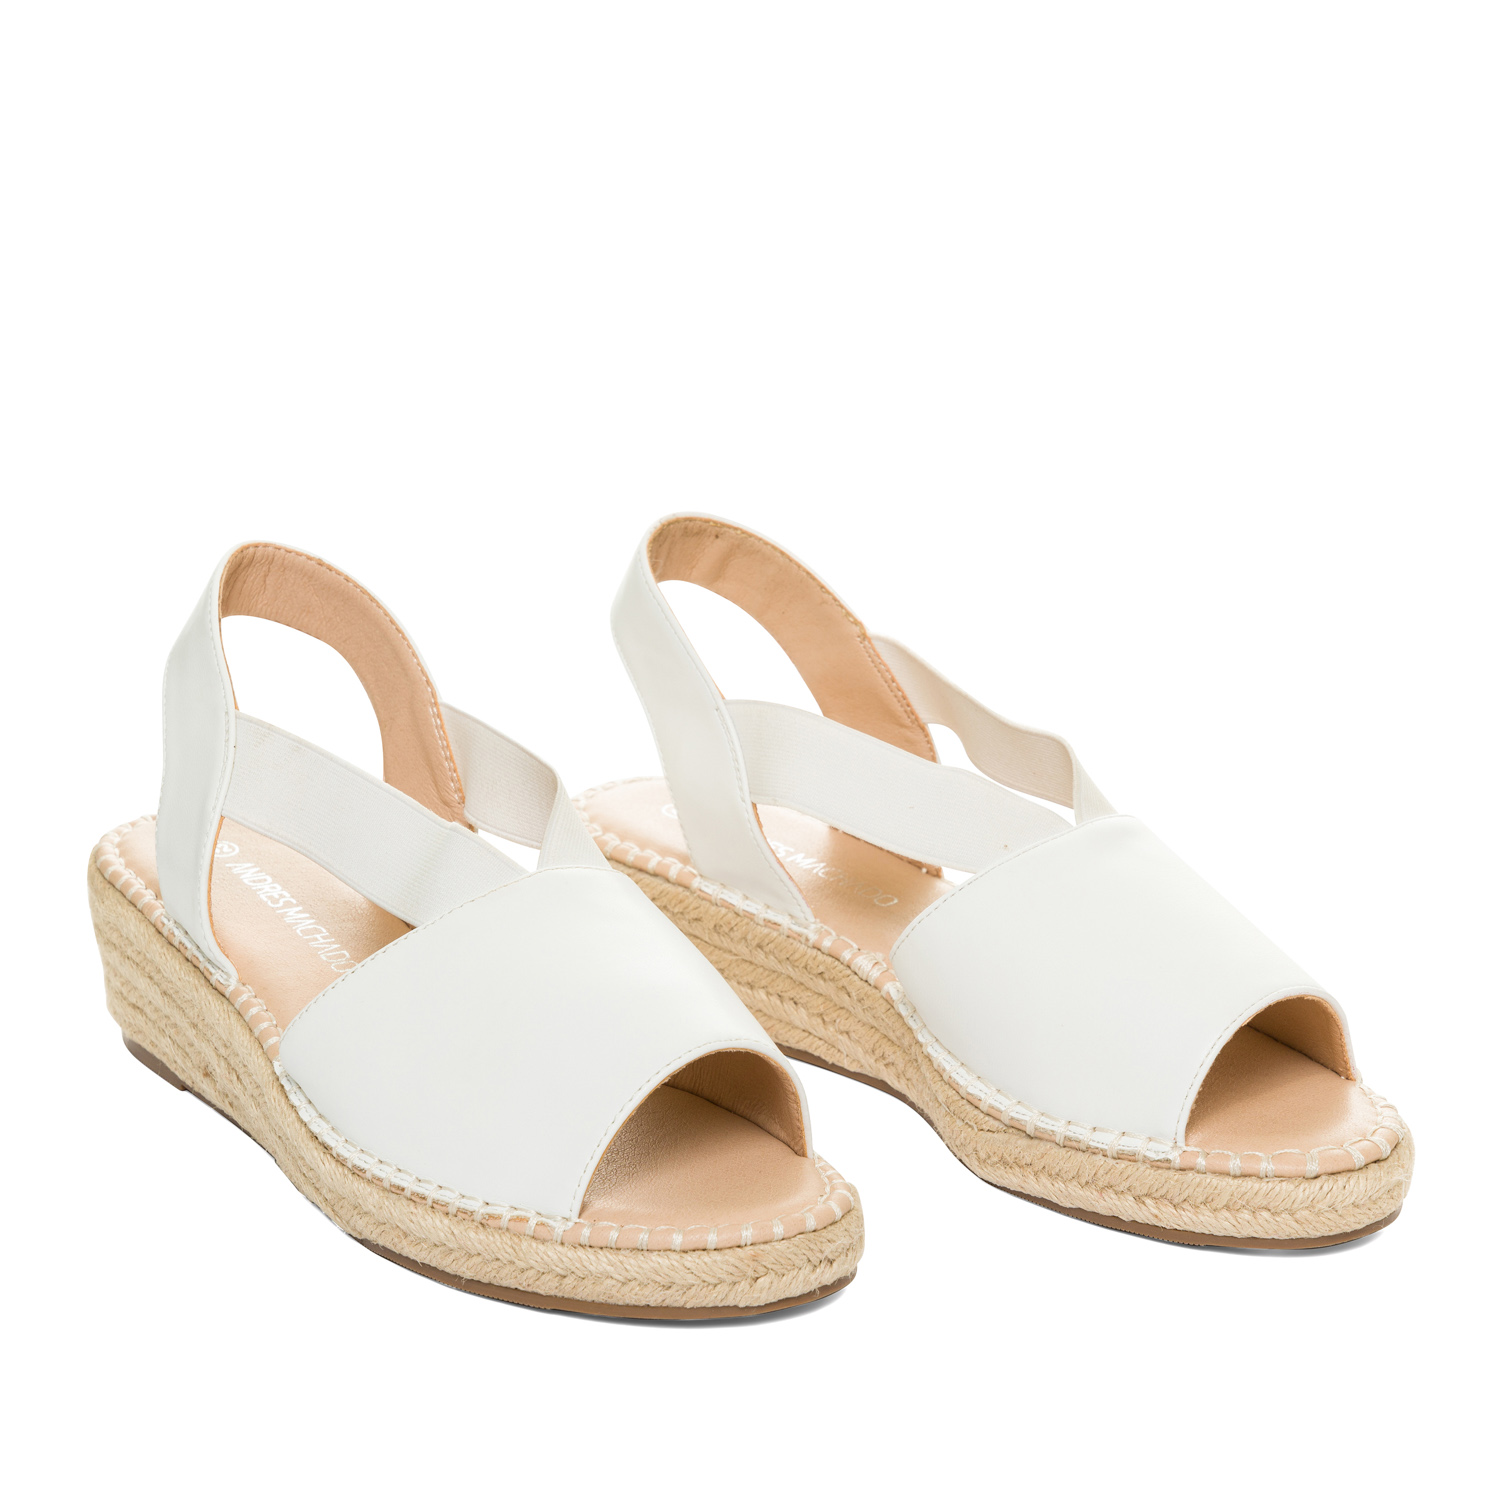 White faux leather sandals with jute wedge 